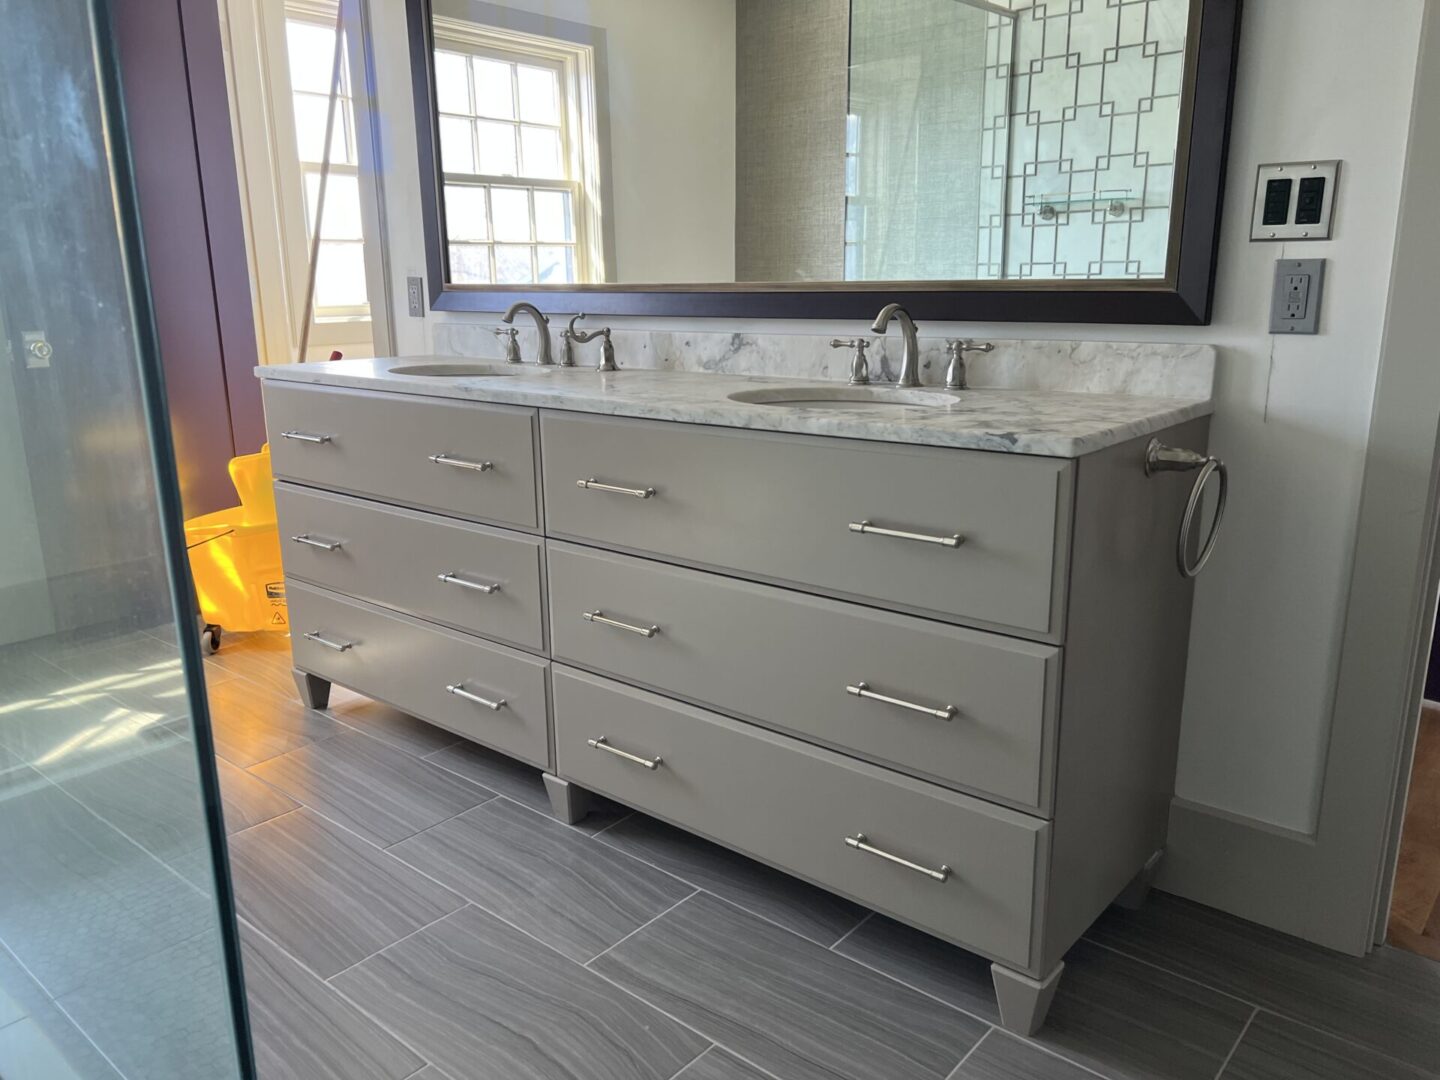 Wash area with mirror and cabinets